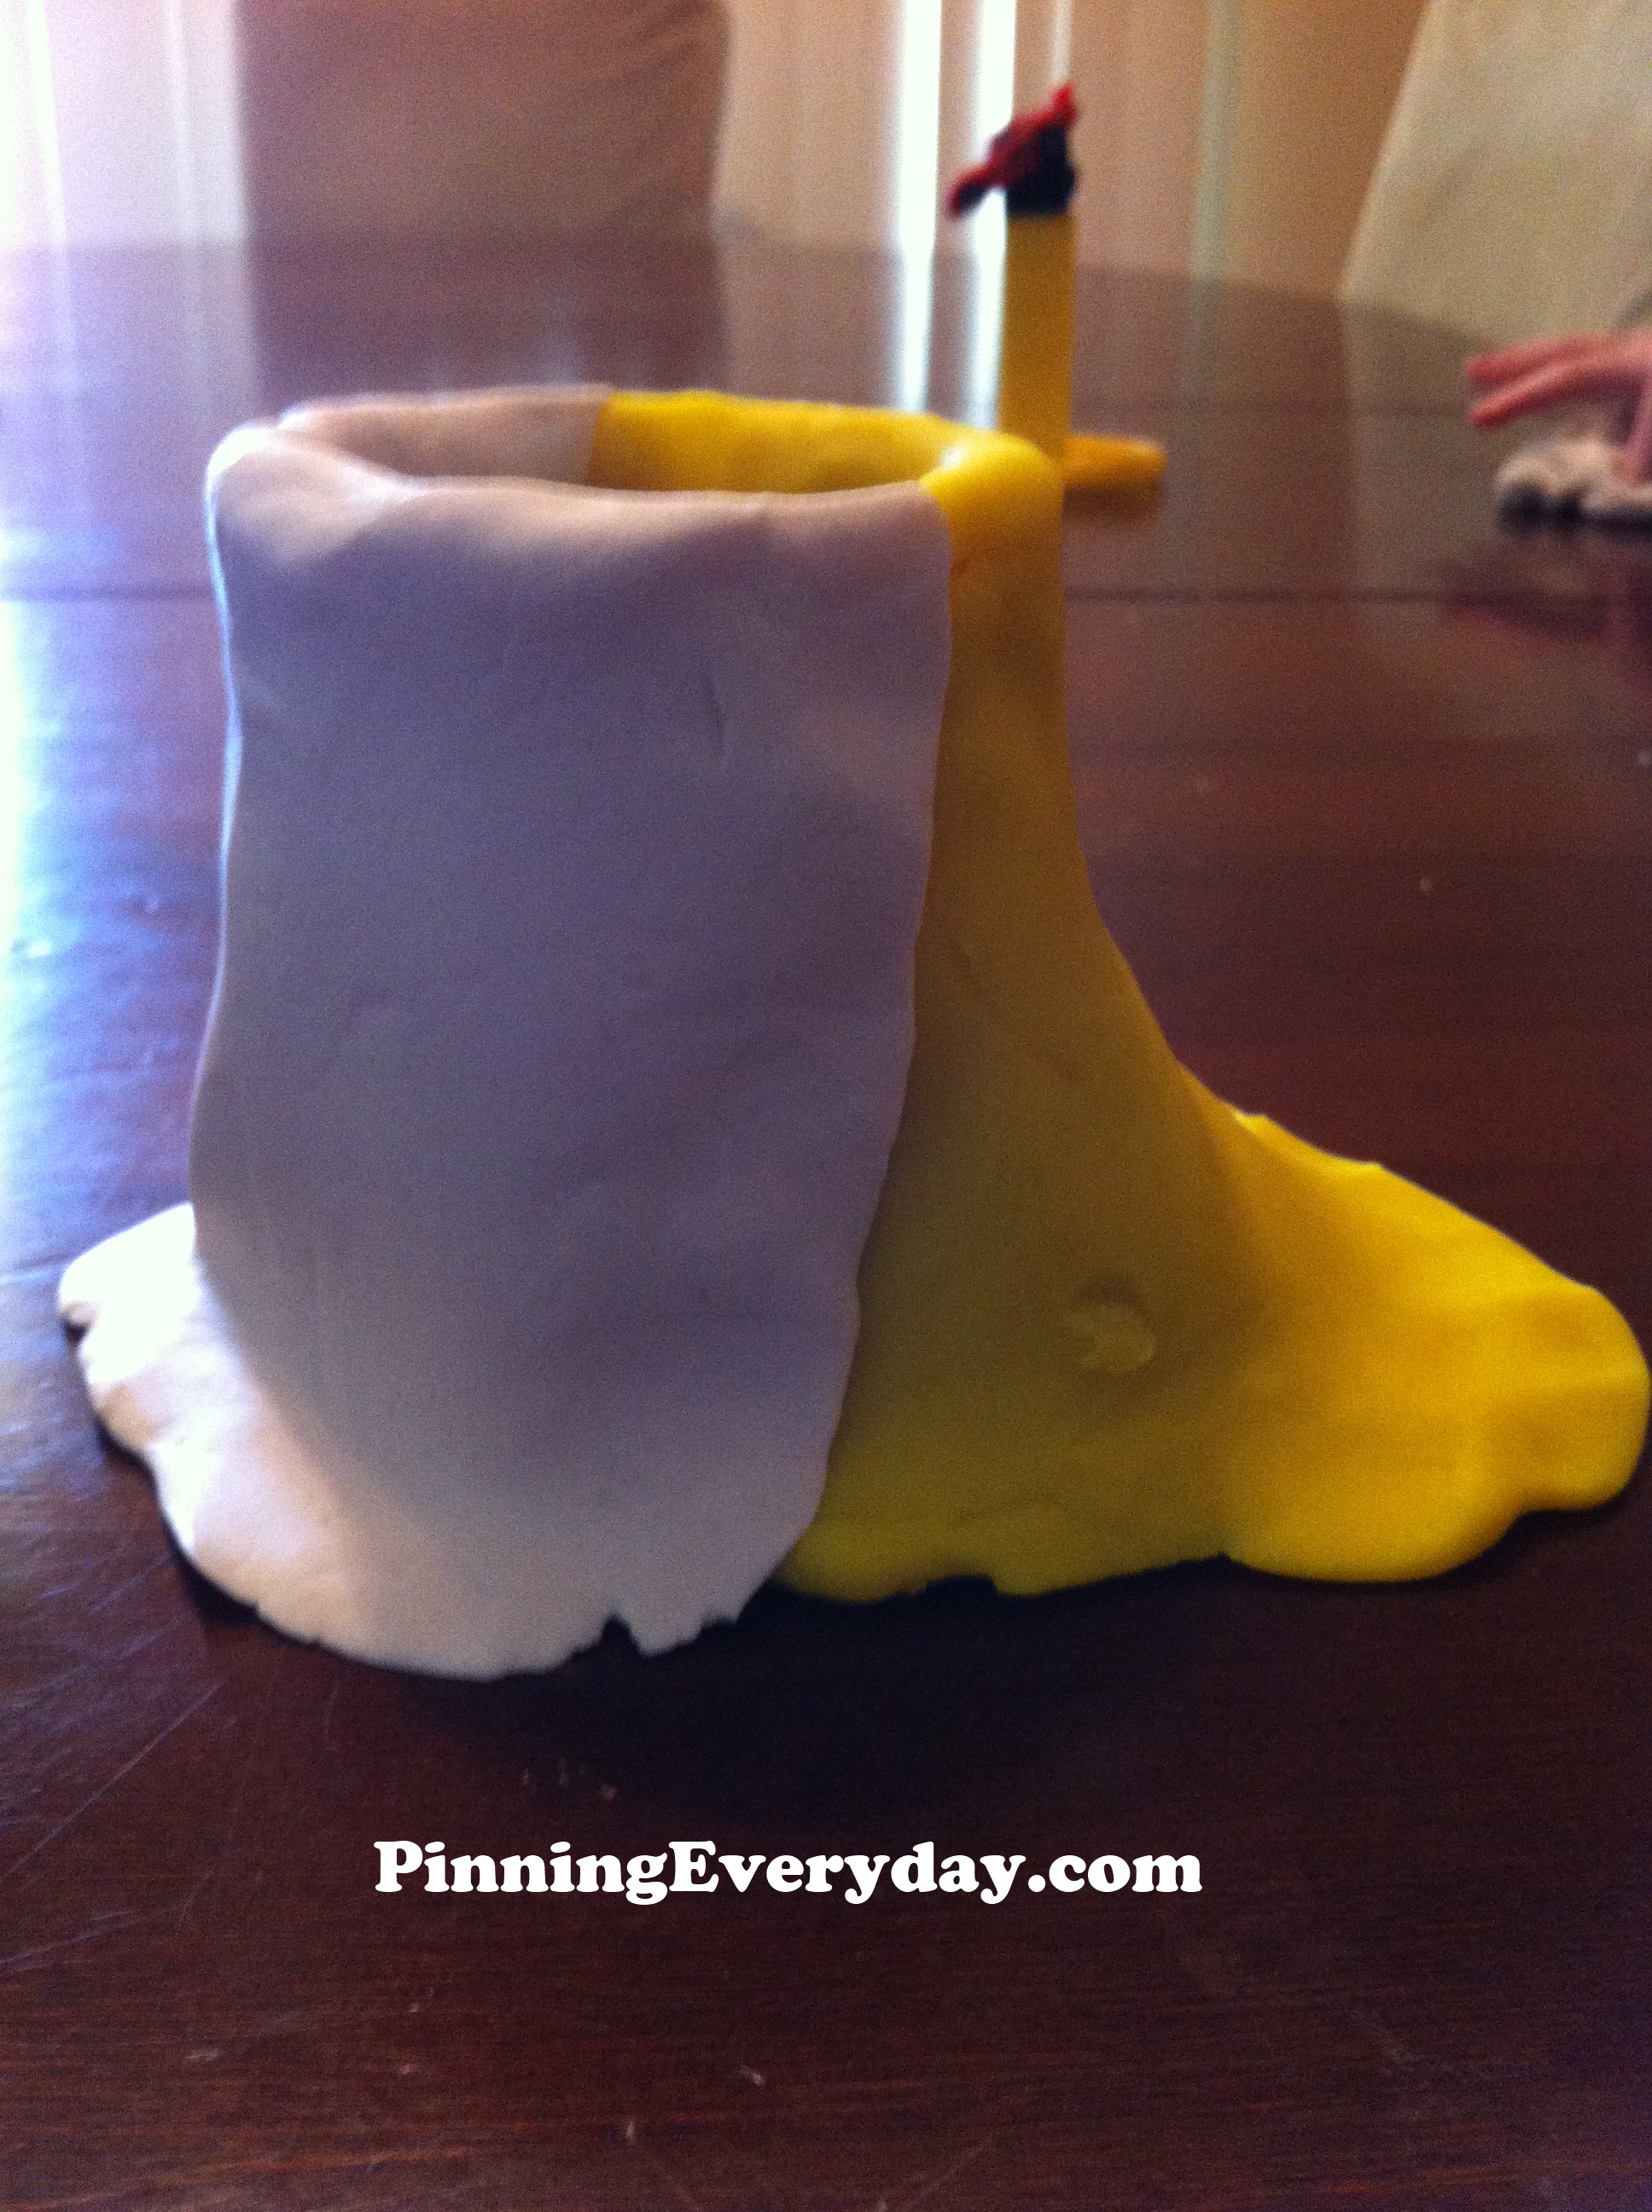 How To Make A Playdoh Volcano - Pinning Everyday